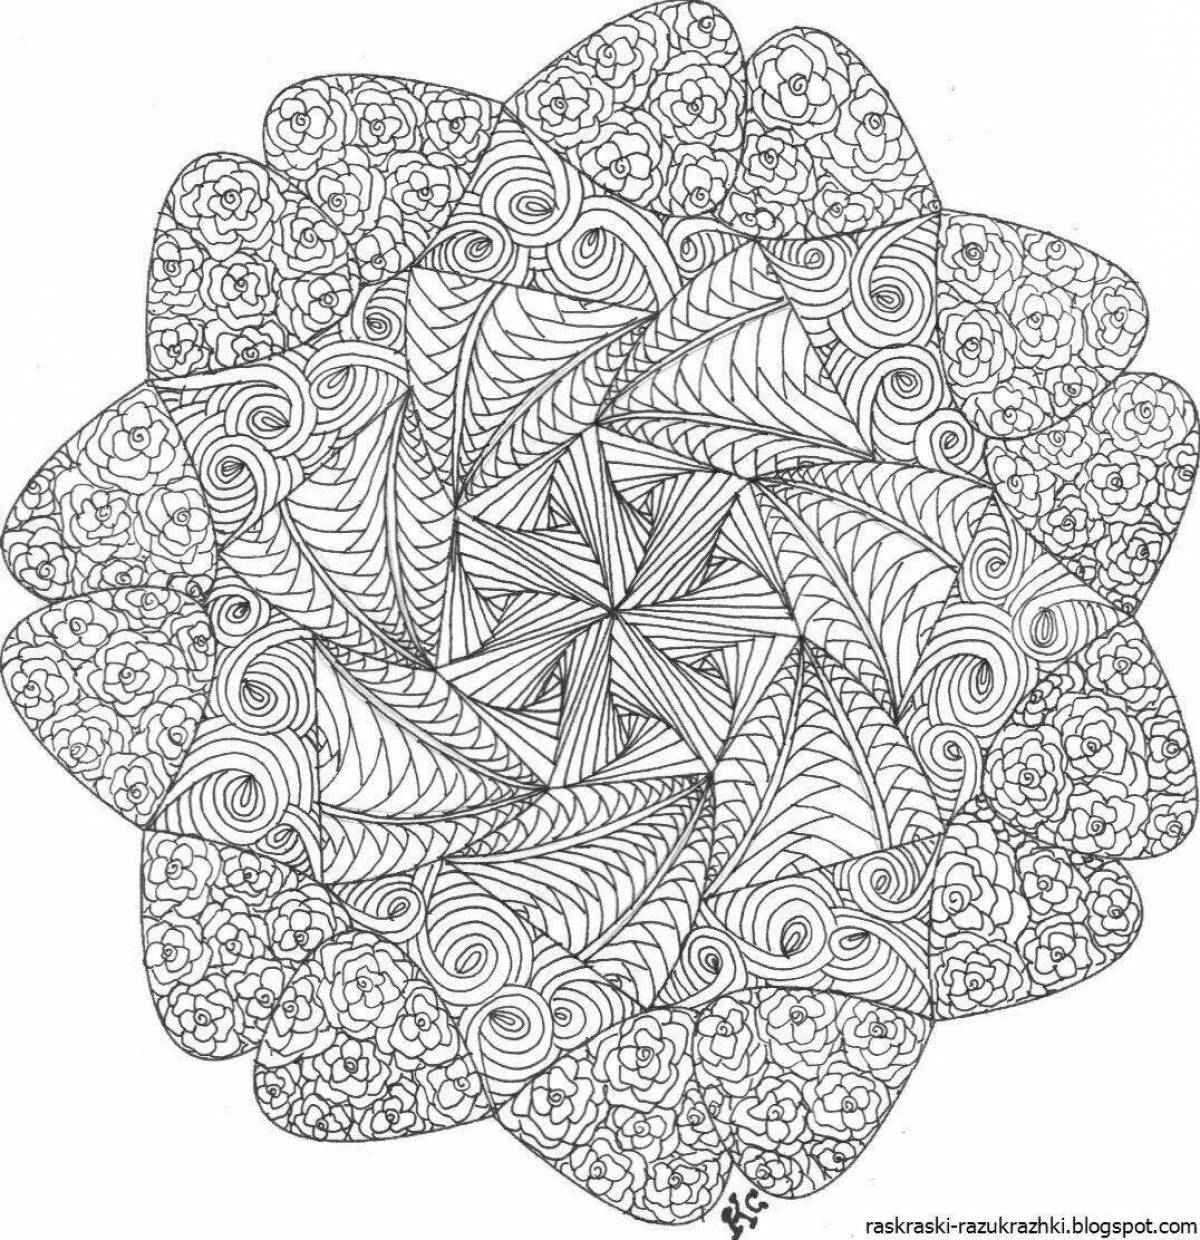 Detailed adult coloring book